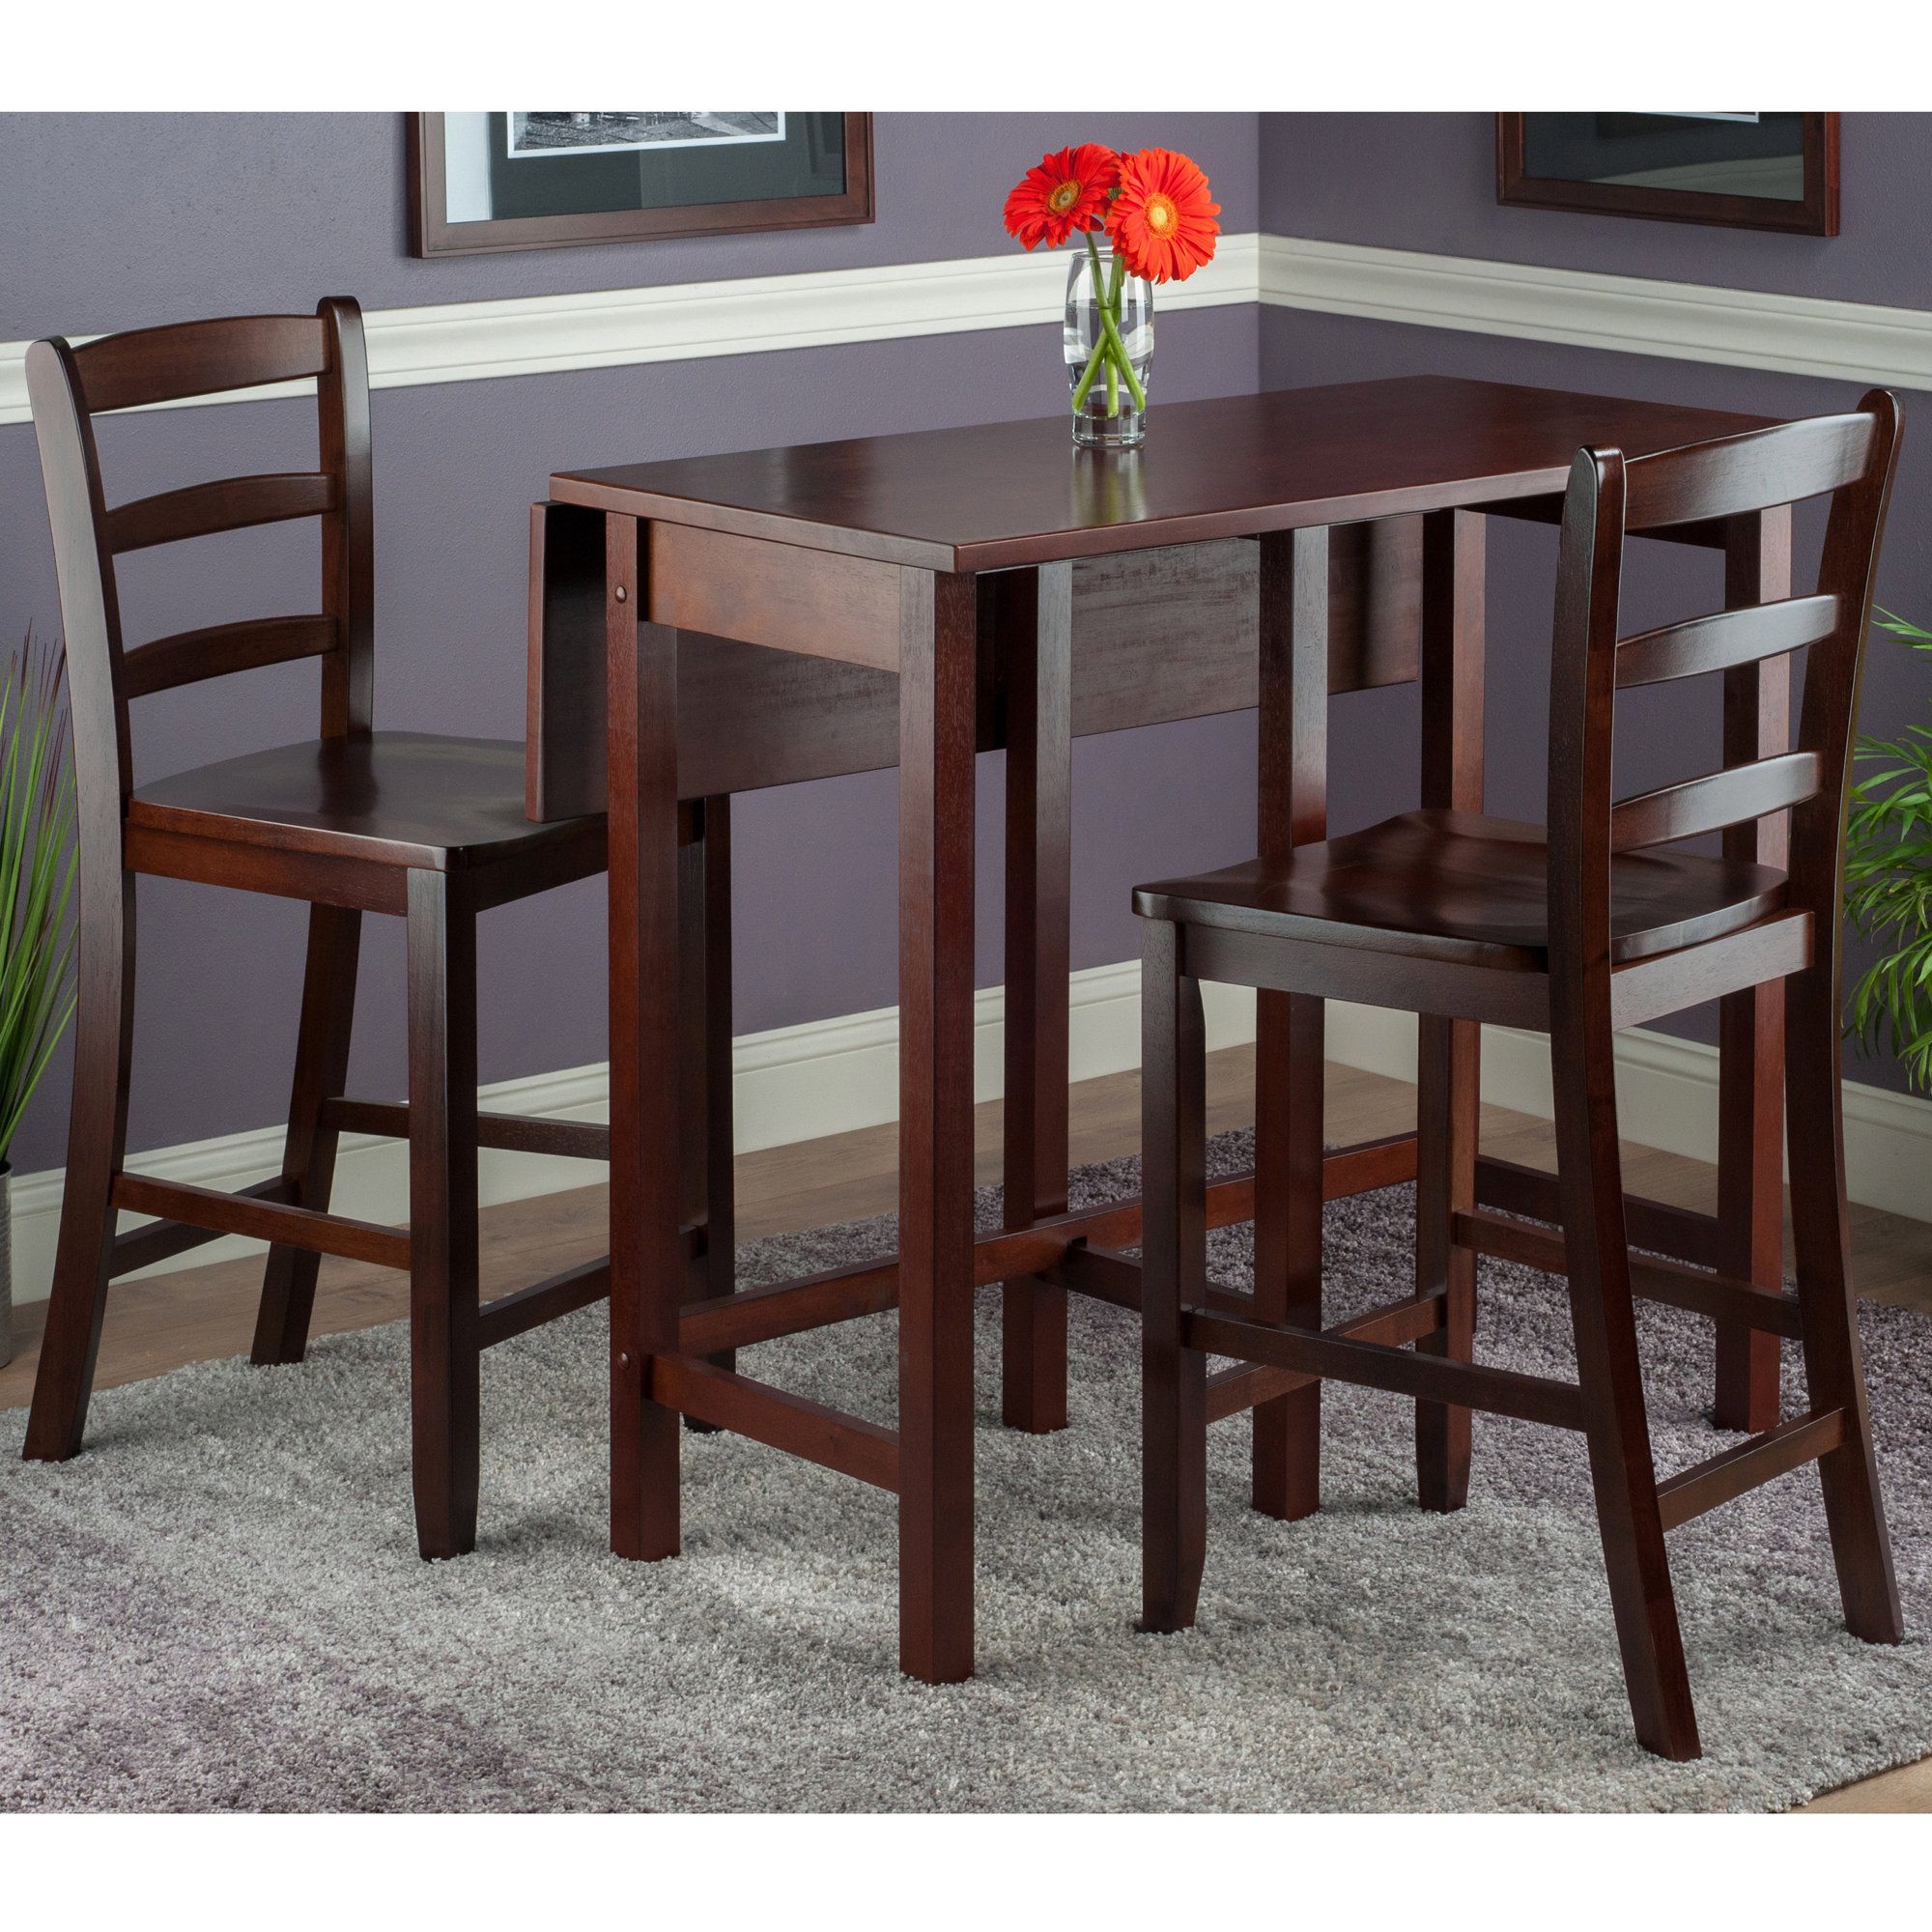 Red Barrel Studio Bettencourt 3 Piece Drop Leaf Dining Set & Reviews Inside Newest Crownover 3 Piece Bar Table Sets (View 6 of 20)